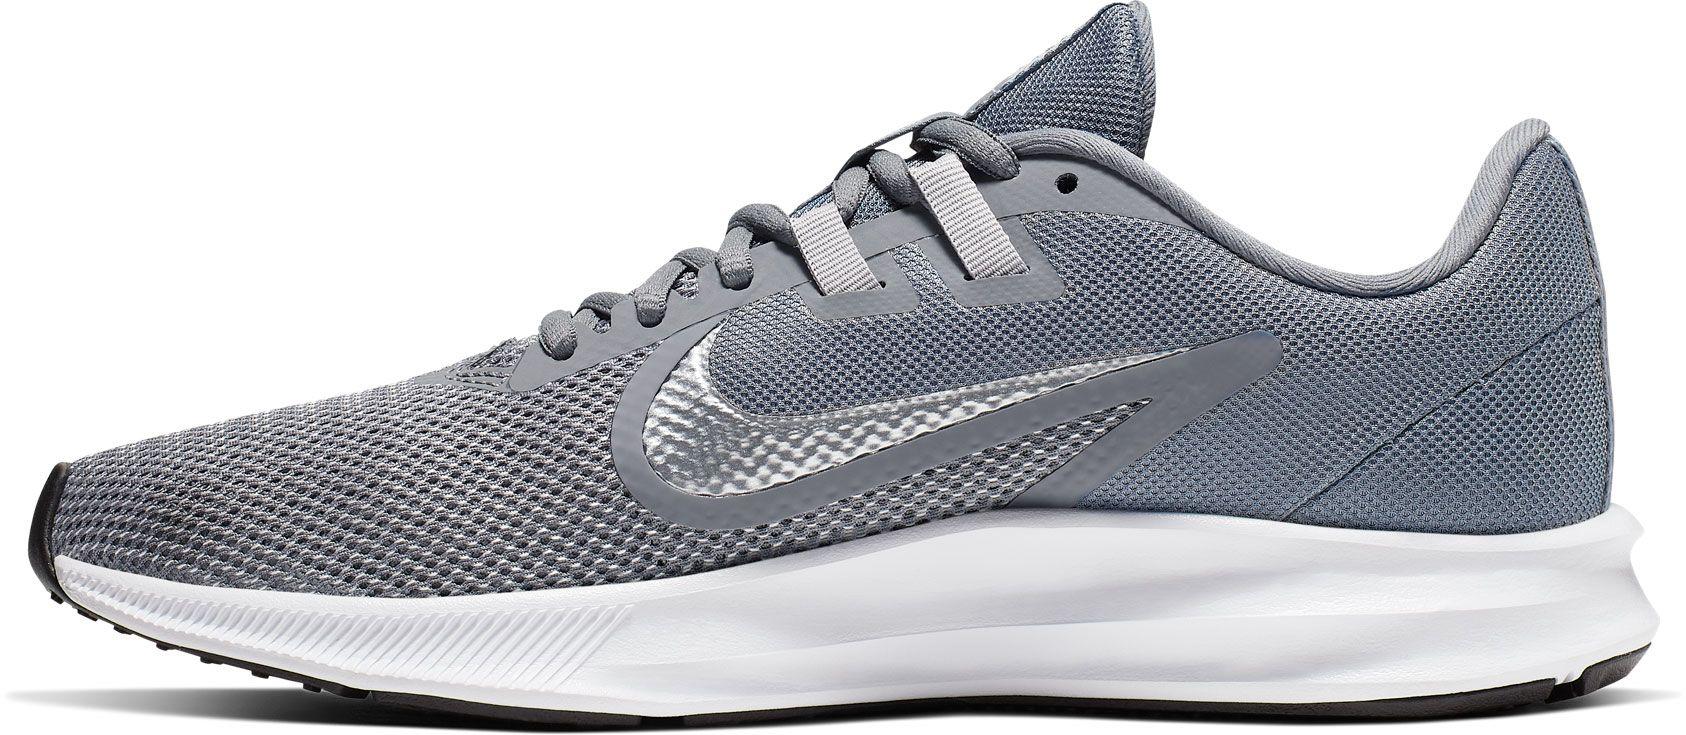 Nike Synthetic Downshifter 9 in Grey/White (Gray) - Lyst